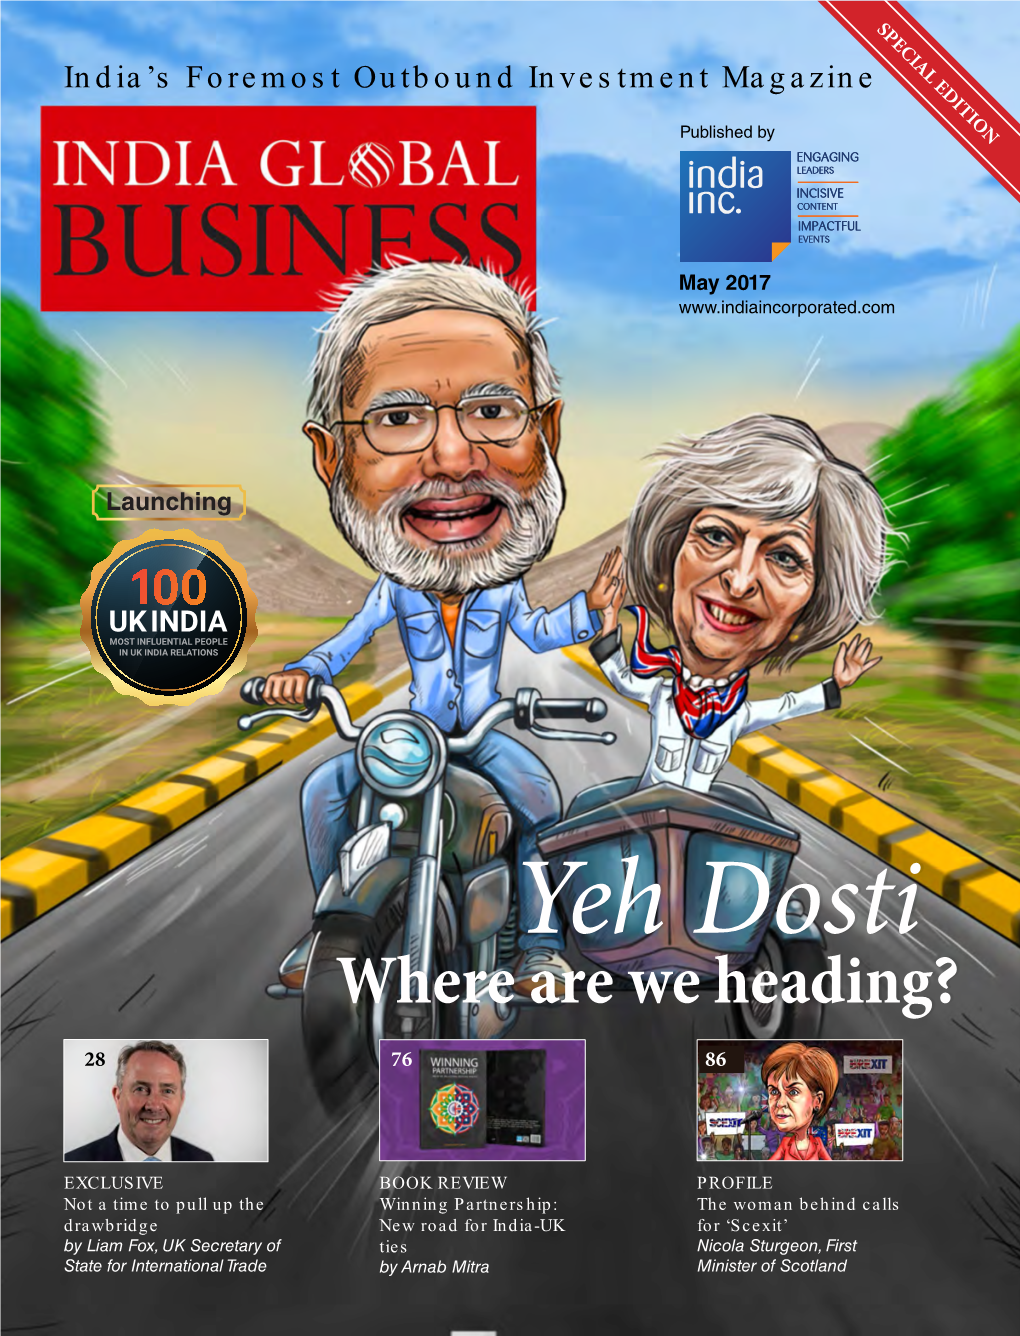 India's Foremost Outbound Investment Magazine